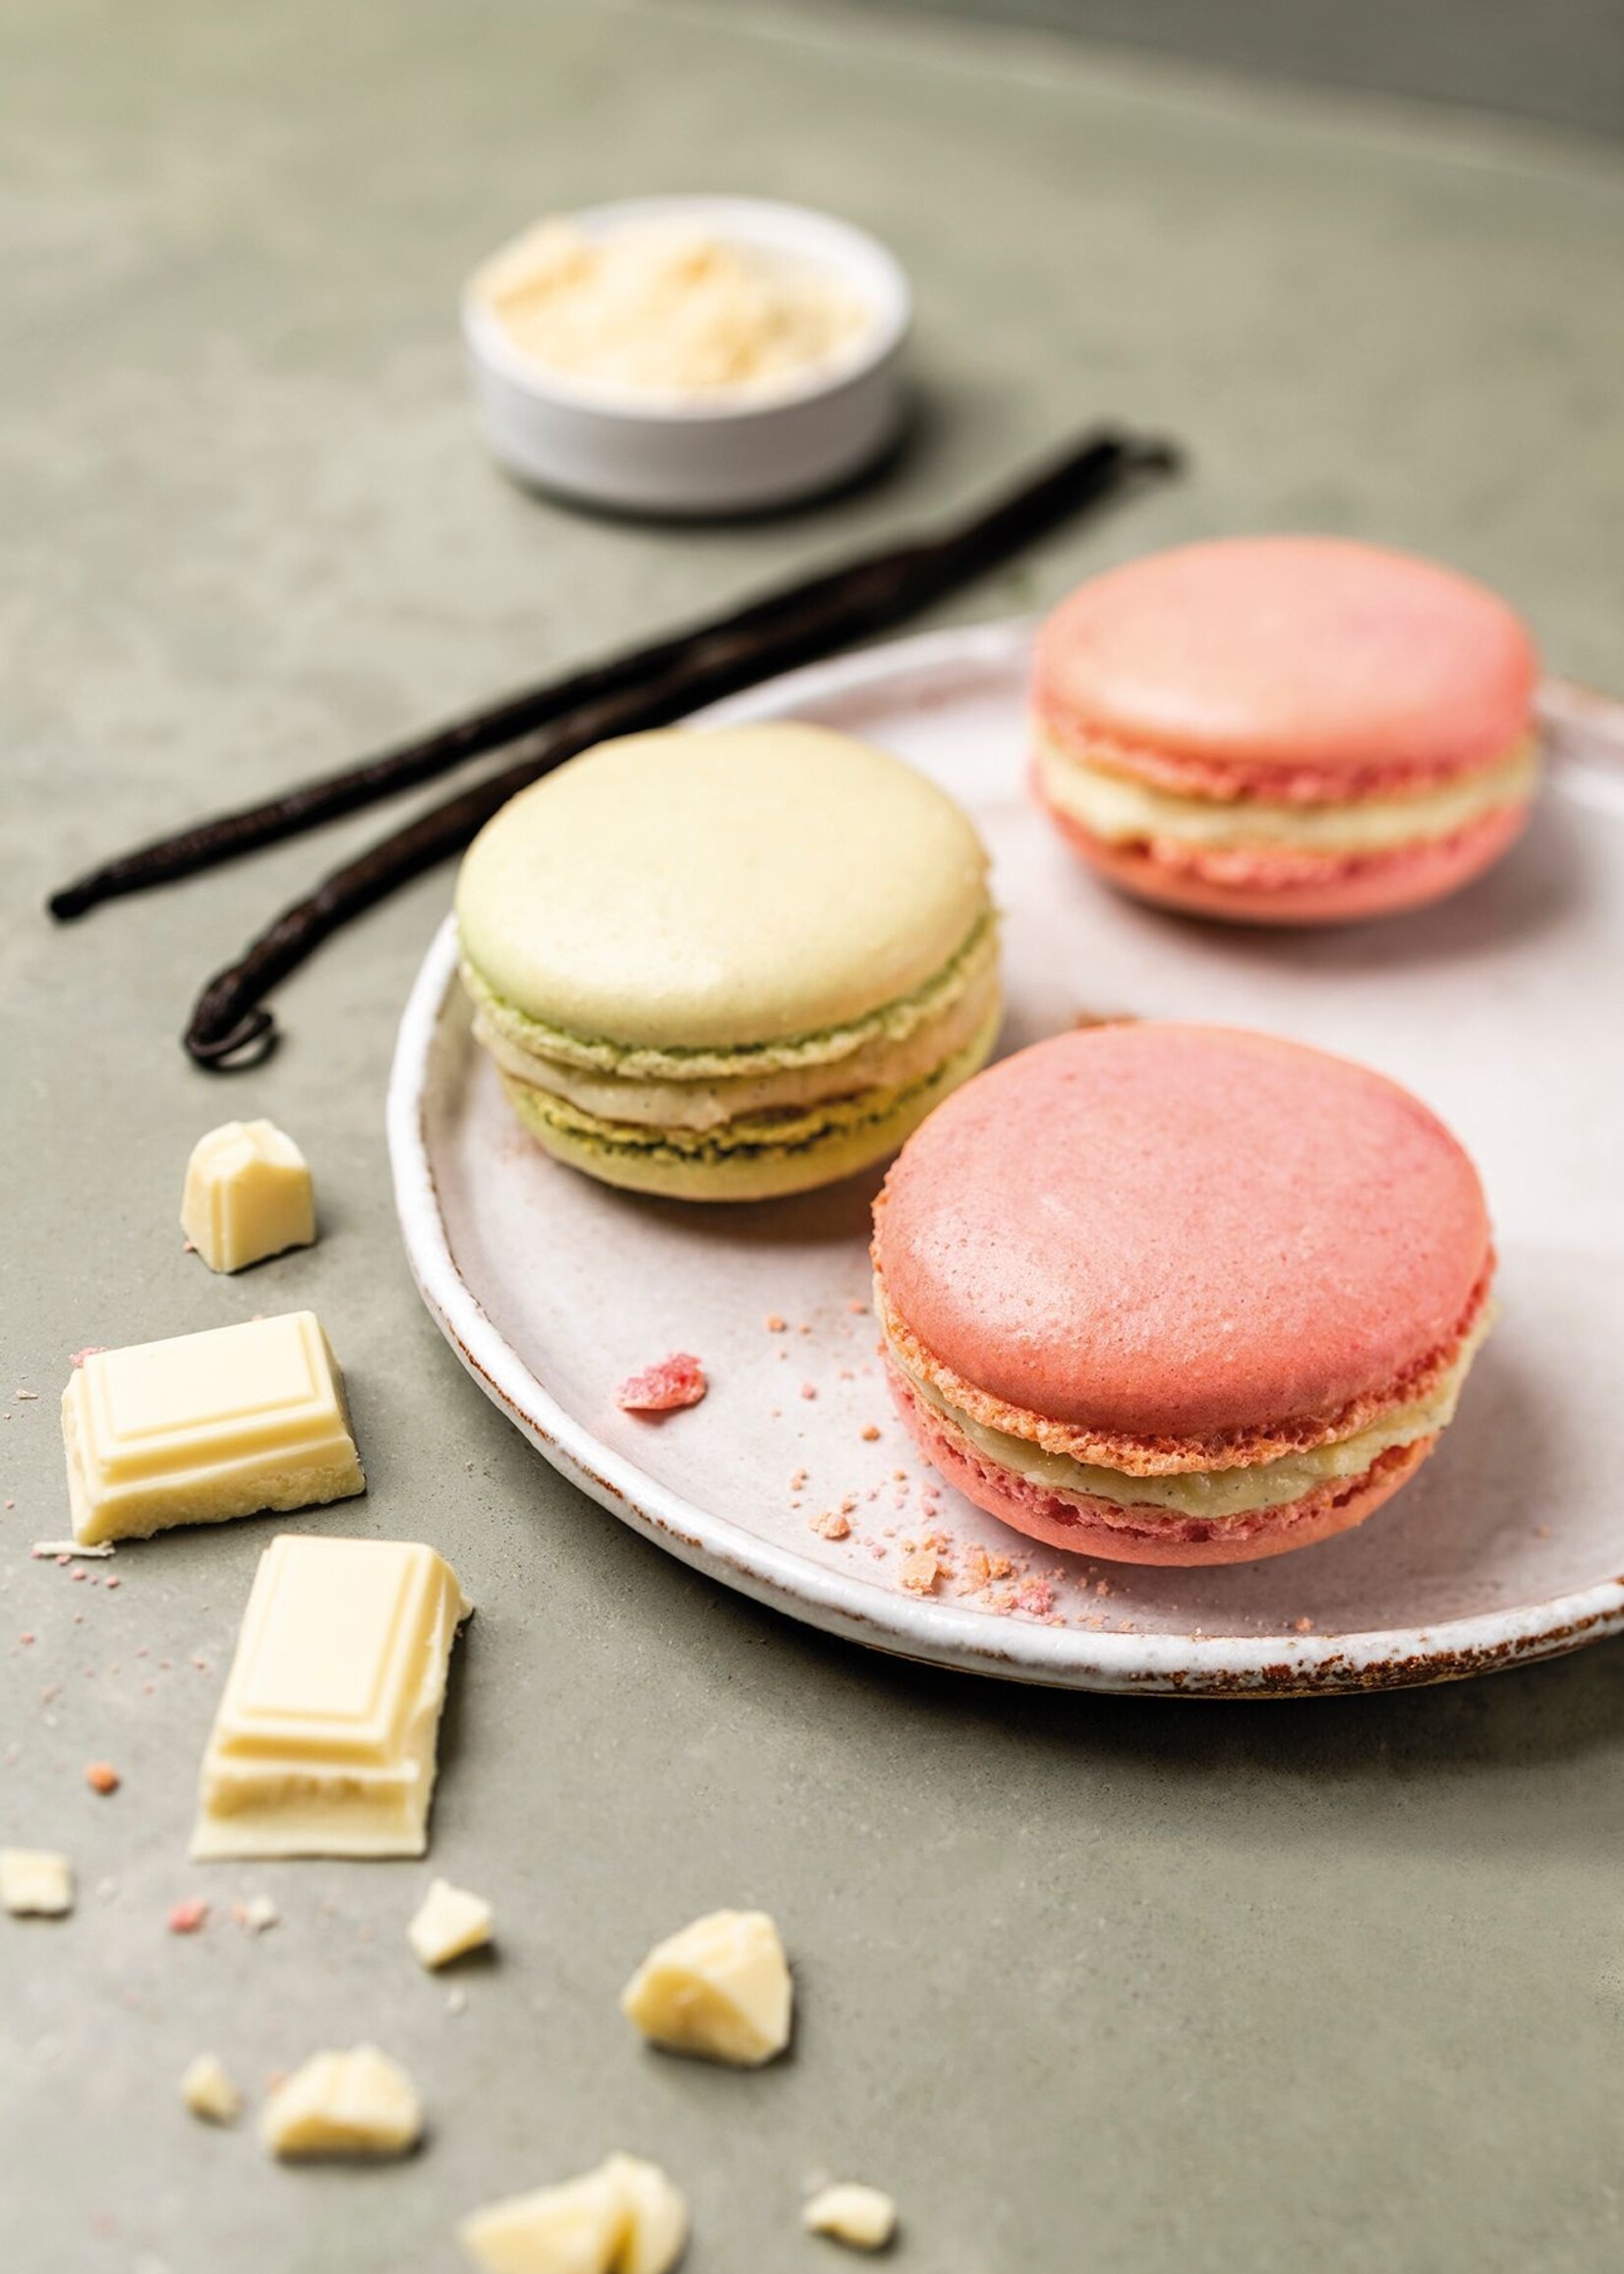 01/17/23 Macaron Workshop SOLD OUT